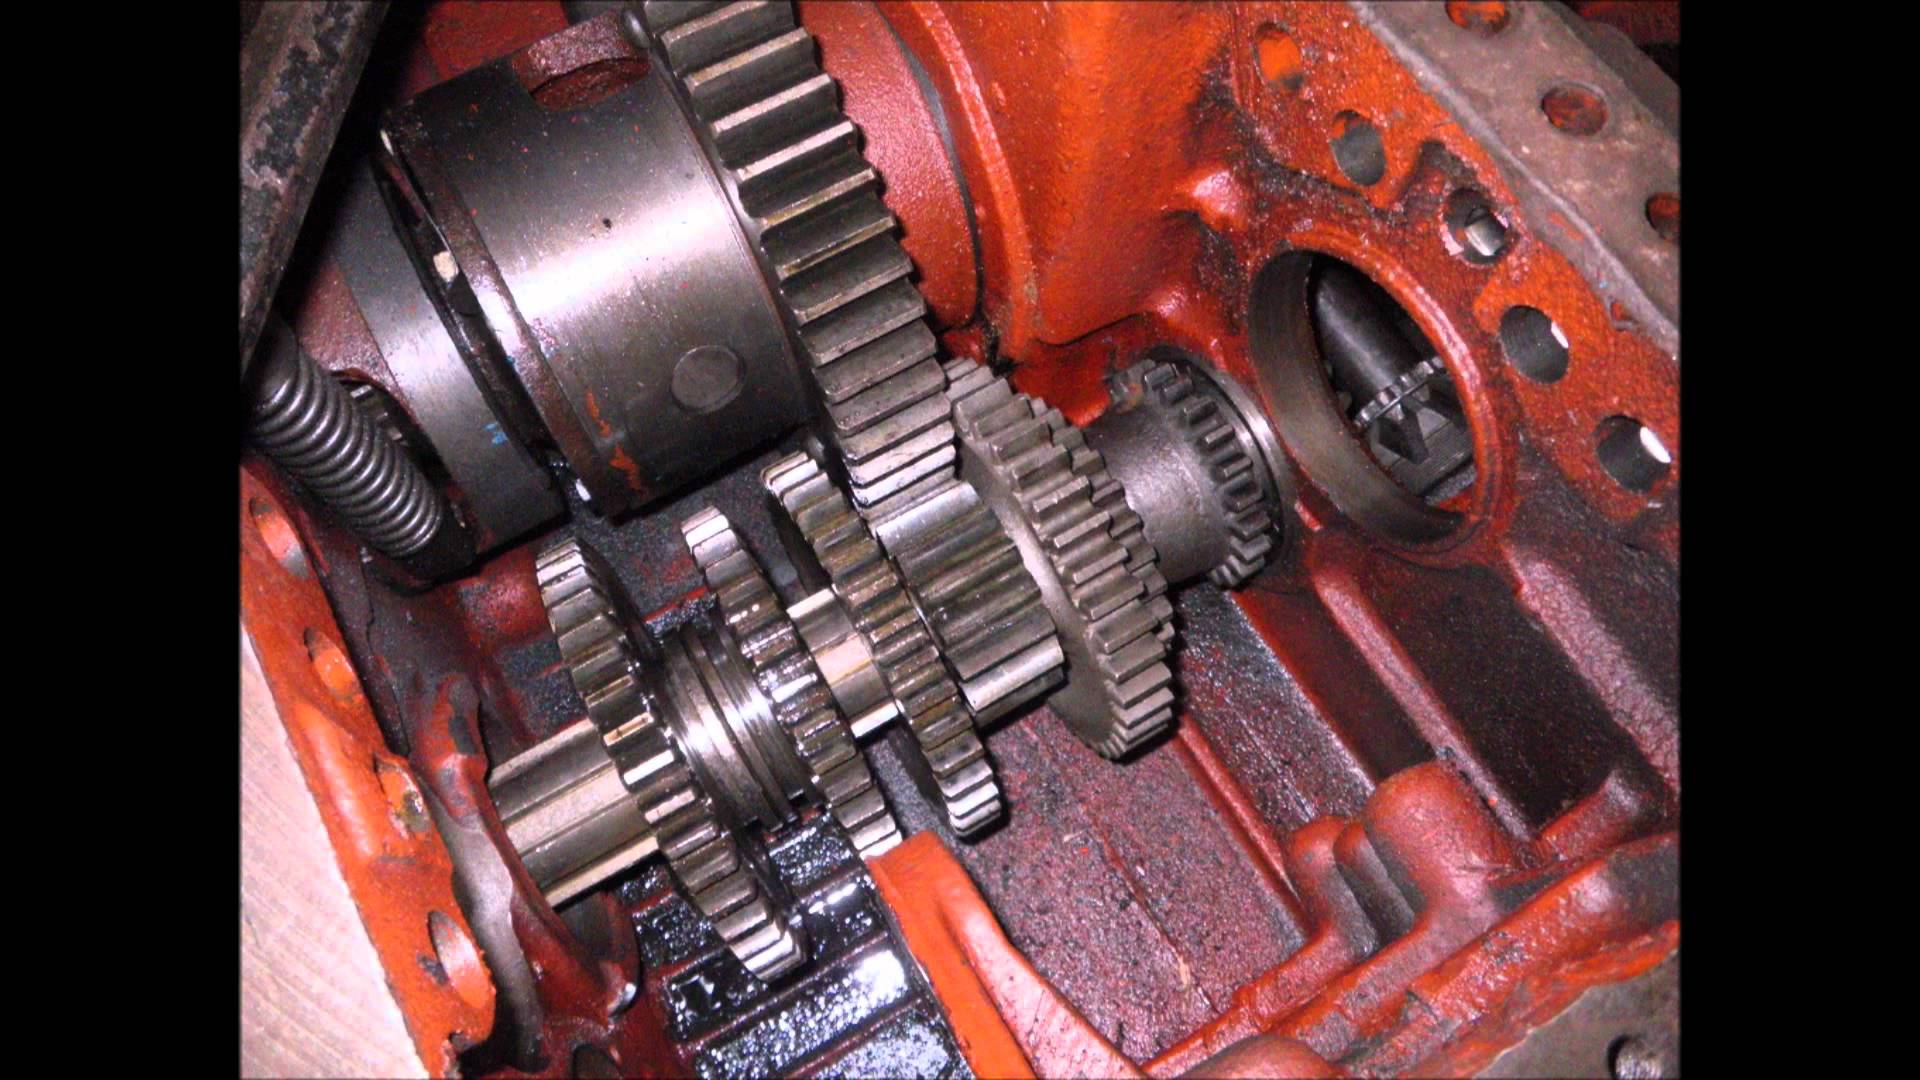 Belarus 426 /LTZ T40-AM - Gearbox (problem and project pics) - YouTube